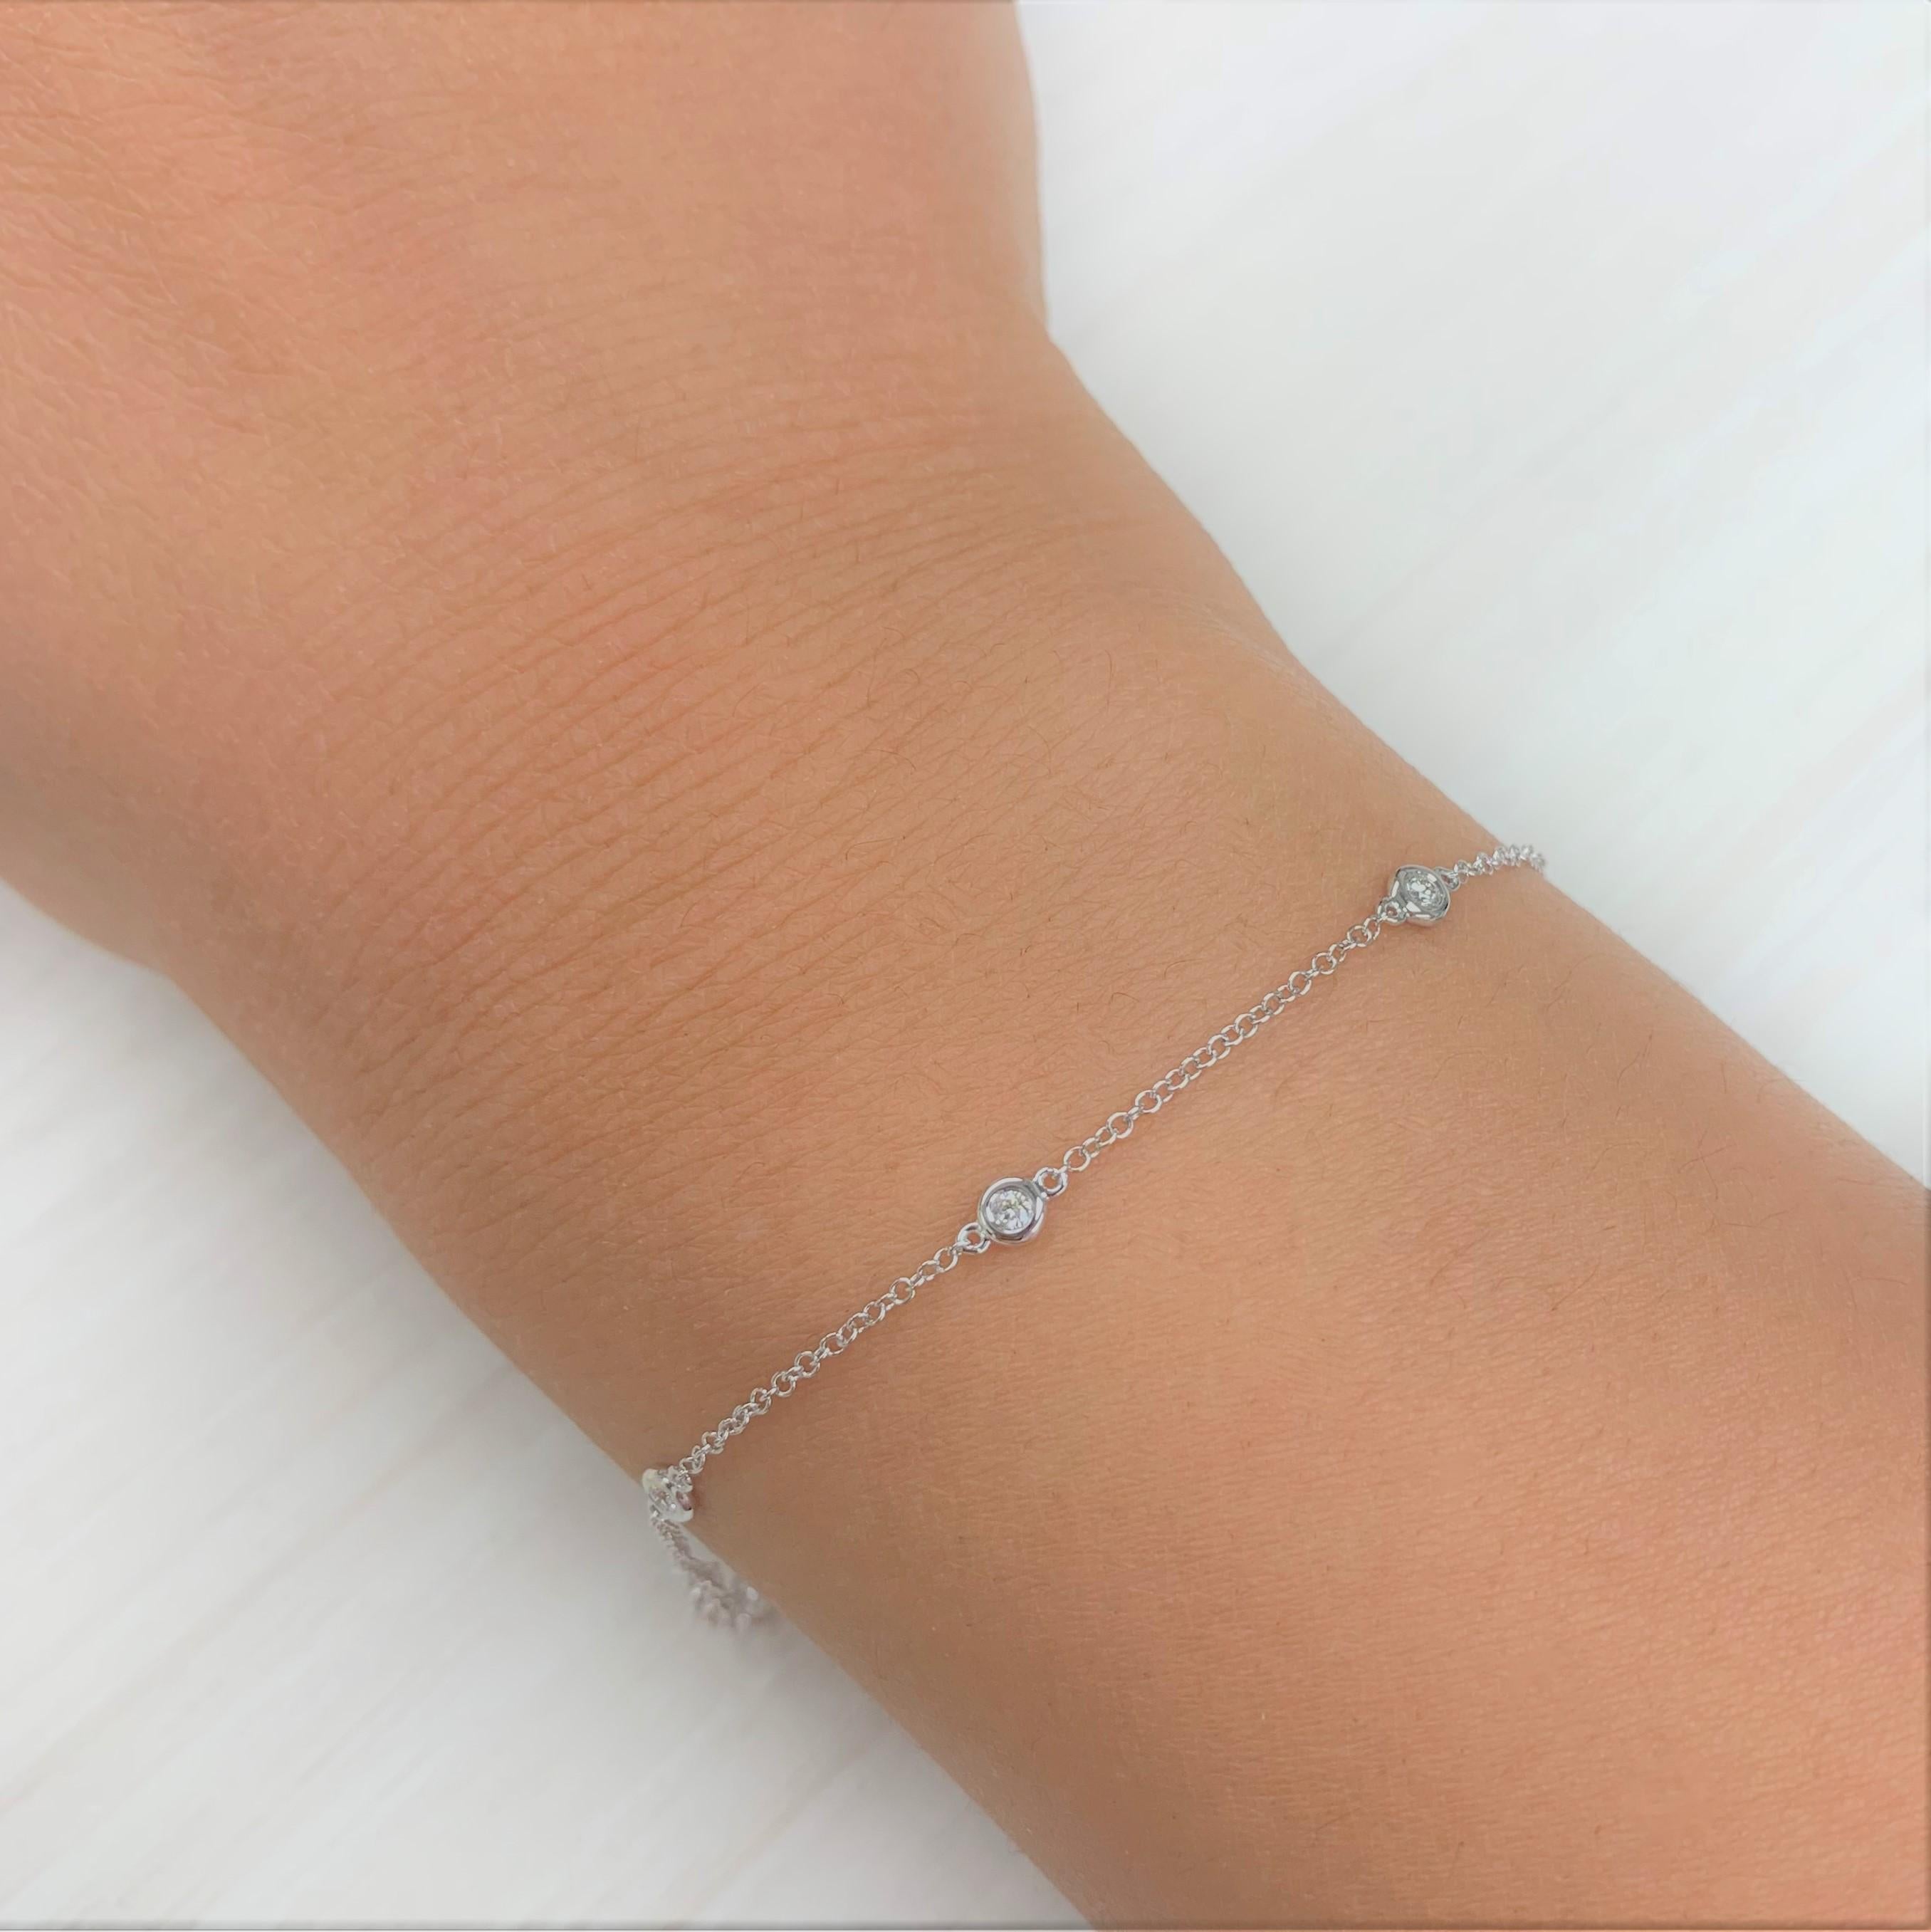 Diamond Station Bracelet: Focused on design and detail, this diamond Station chain bracelet for her features 0.10ct Natural Diamonds and is crafted in 14k white, yellow or rose gold. Diamond Color and Clarity GH-SI1. Bracelet is adjustable 6.5